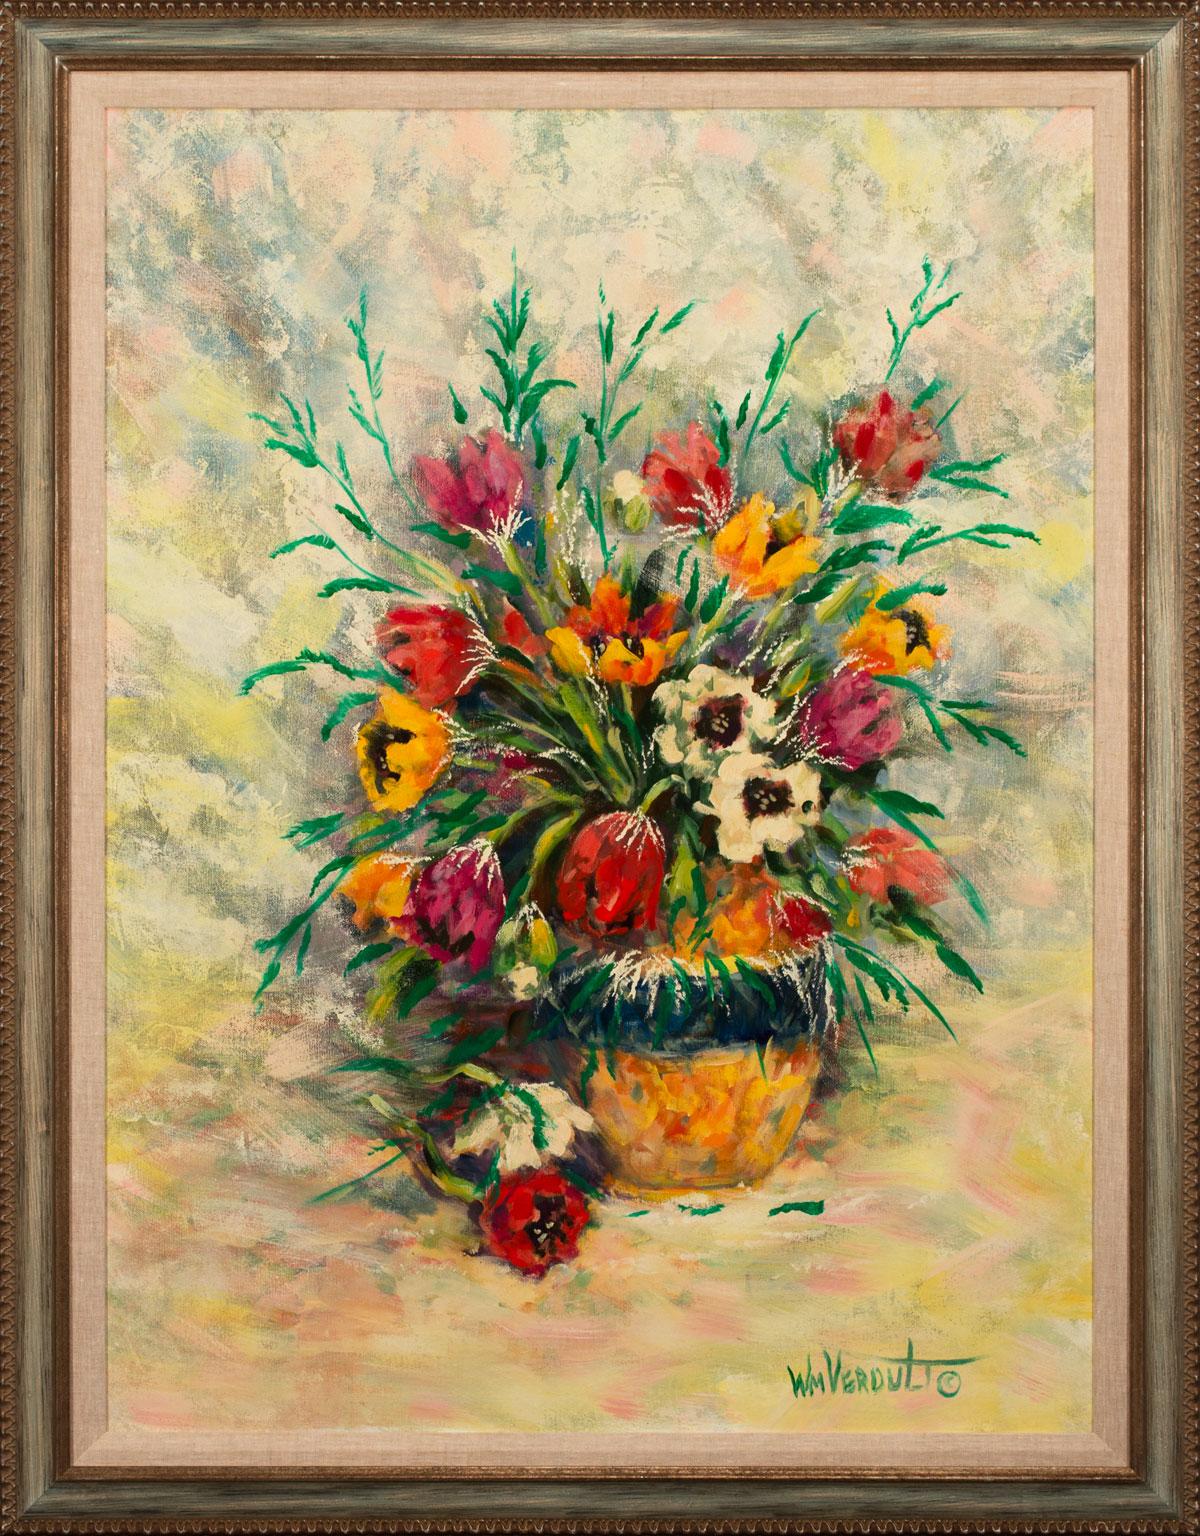 Large Floralscape Original Oil Painting on Canvas by William Verdult, Framed